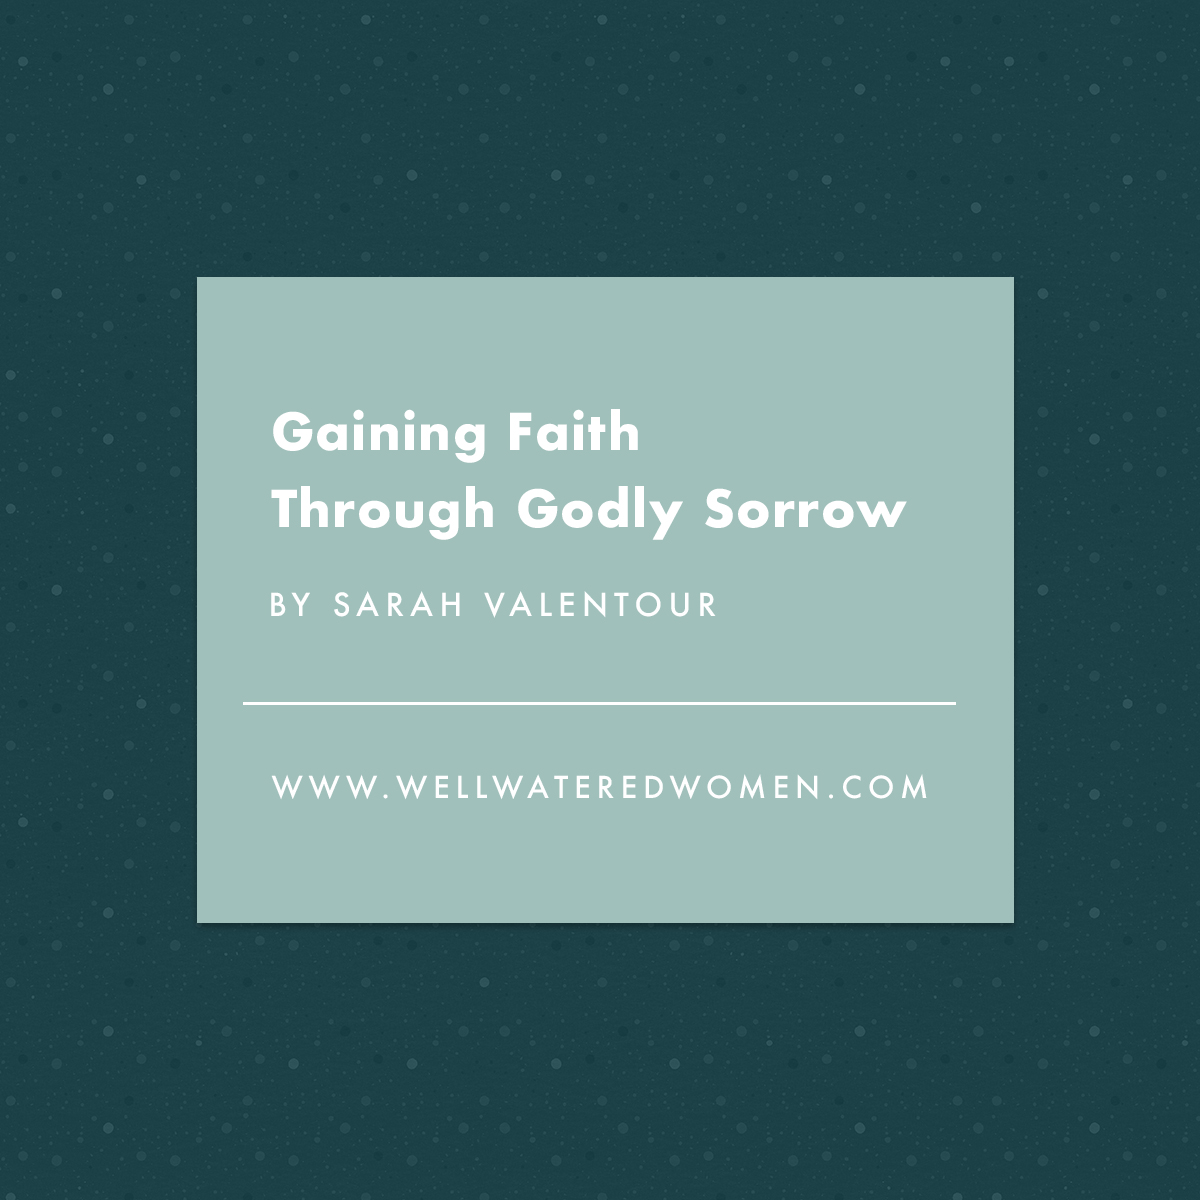 Gaining Faith Through Godly Sorrow - an Article from Well-Watered Women